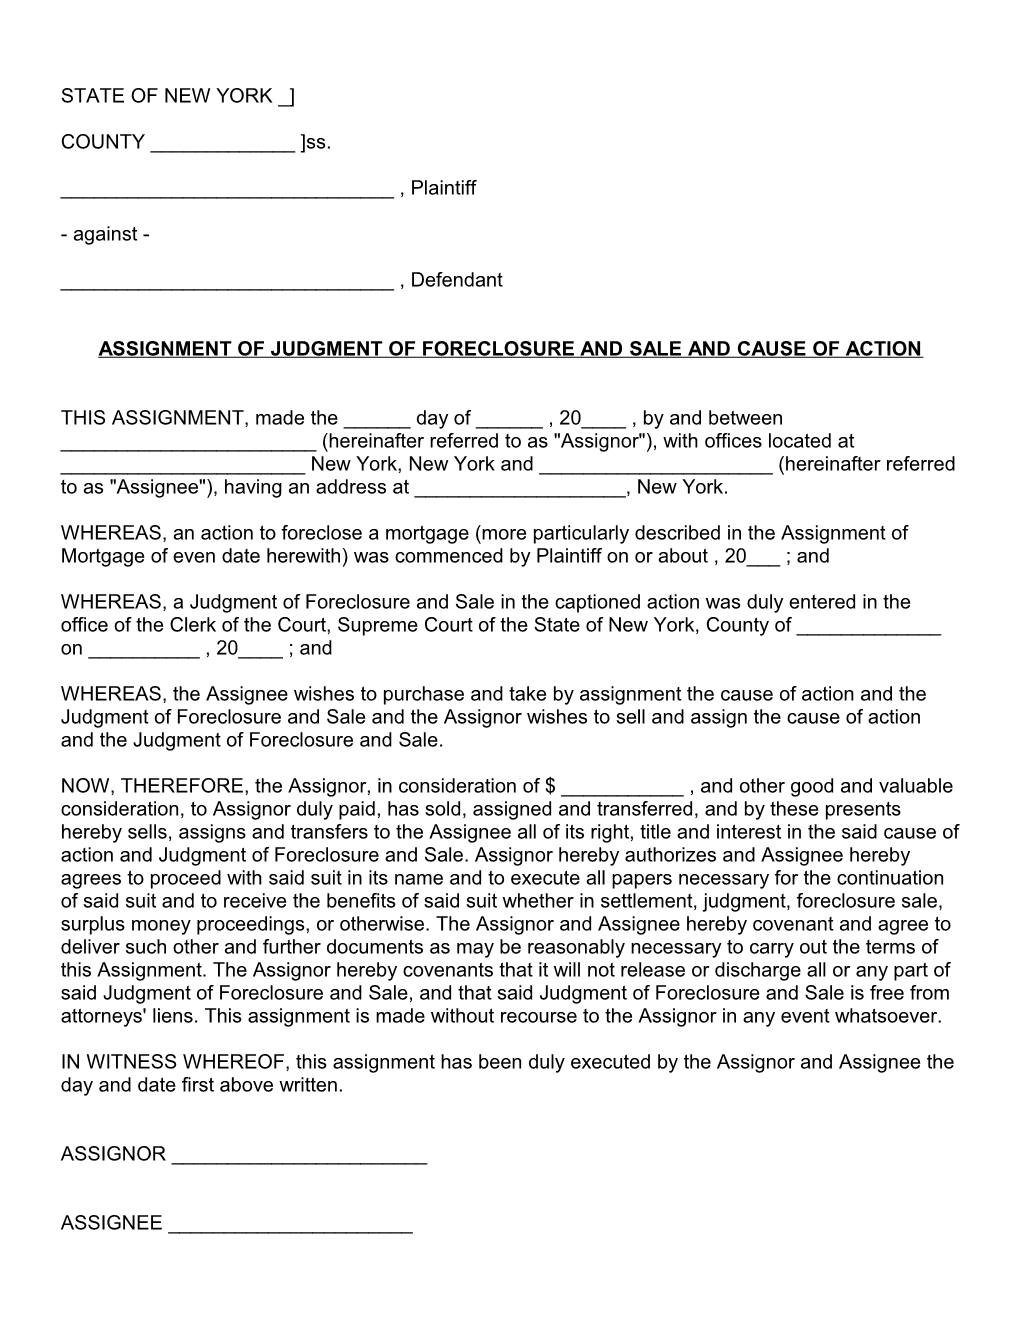 Assignment of Judgment of Foreclosure and Sale and Cause of Action